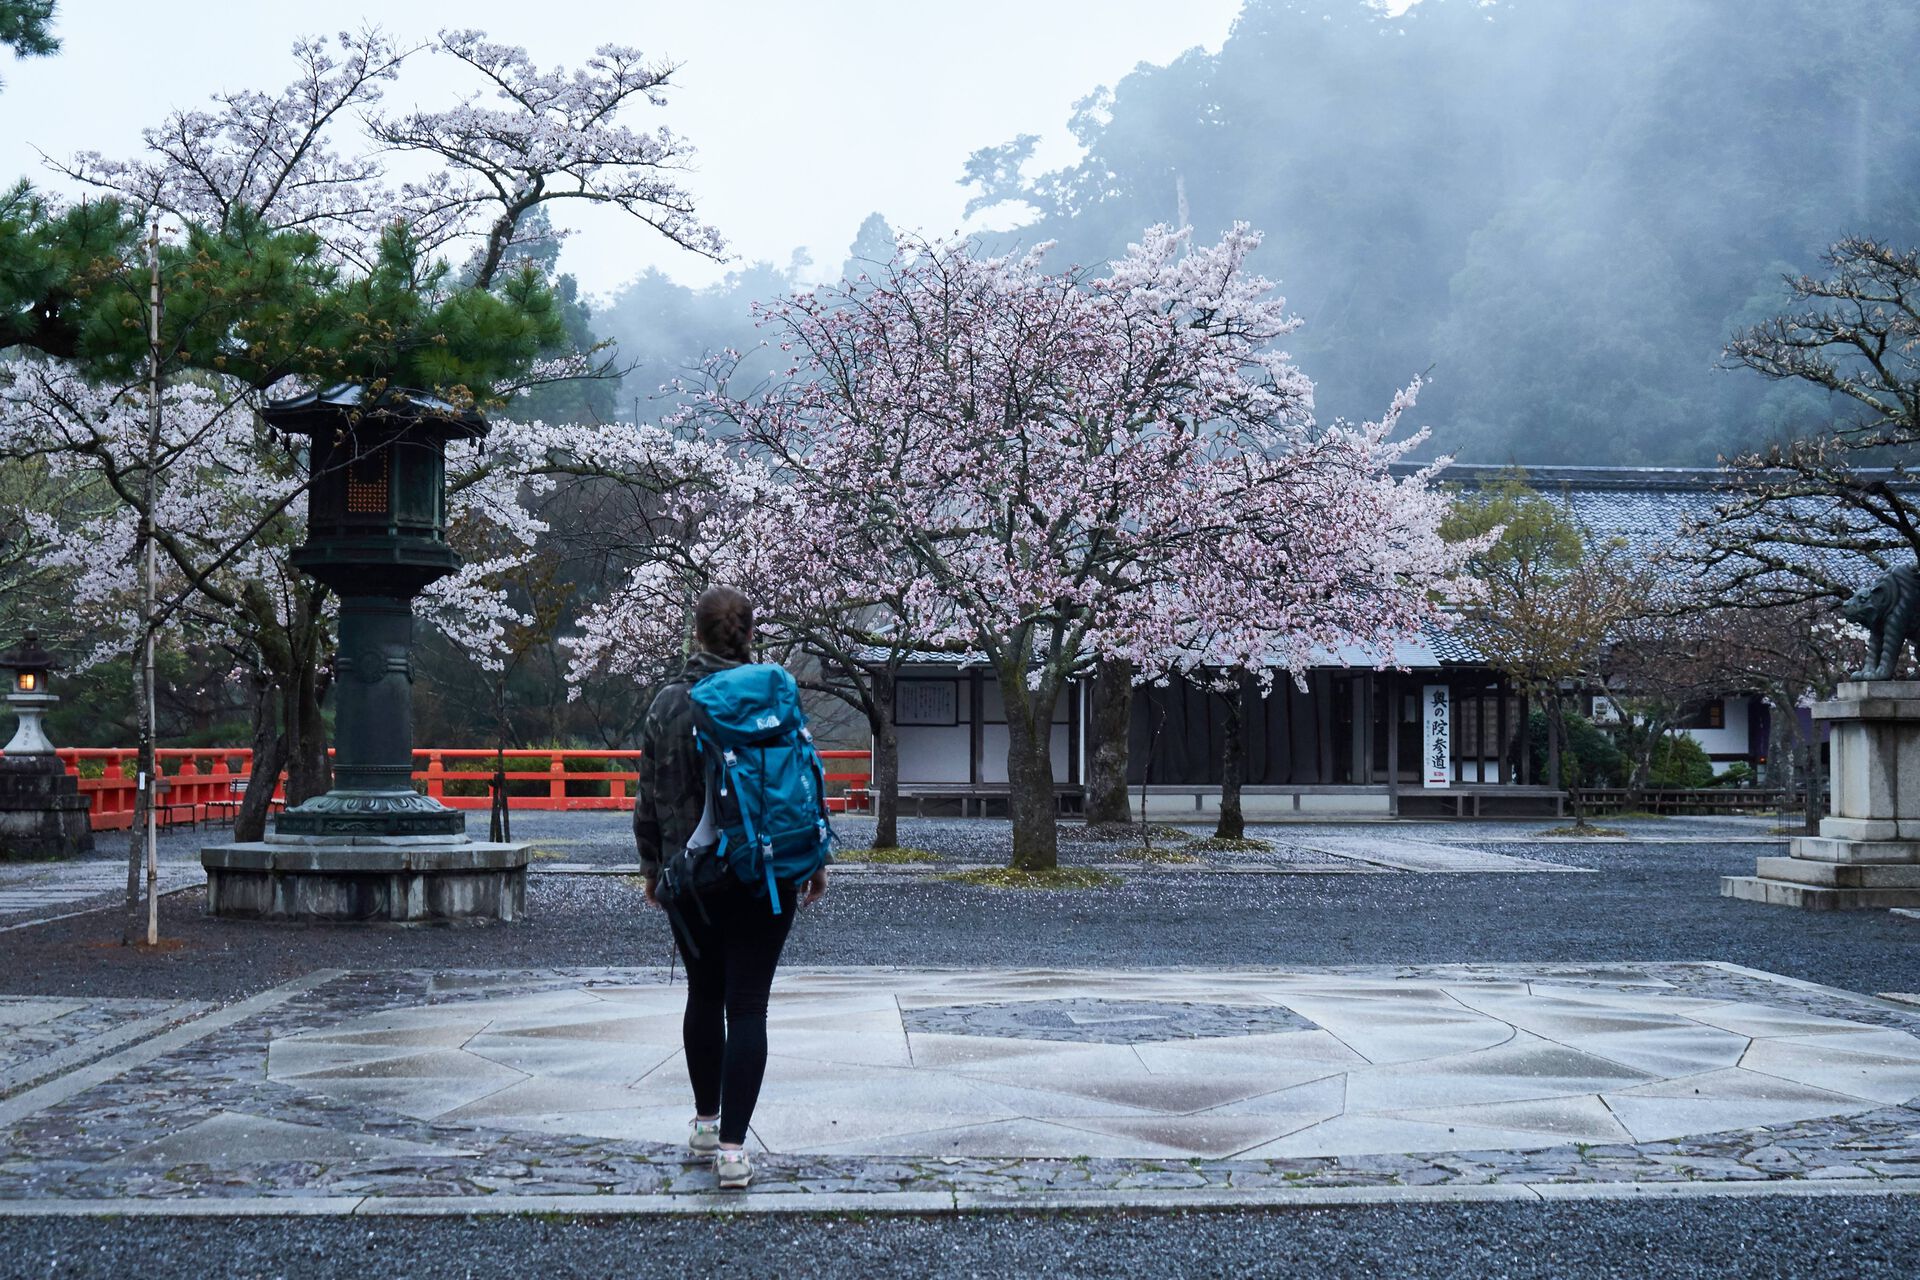 Student on exchange in Japan walking in front of cherry blossom trees